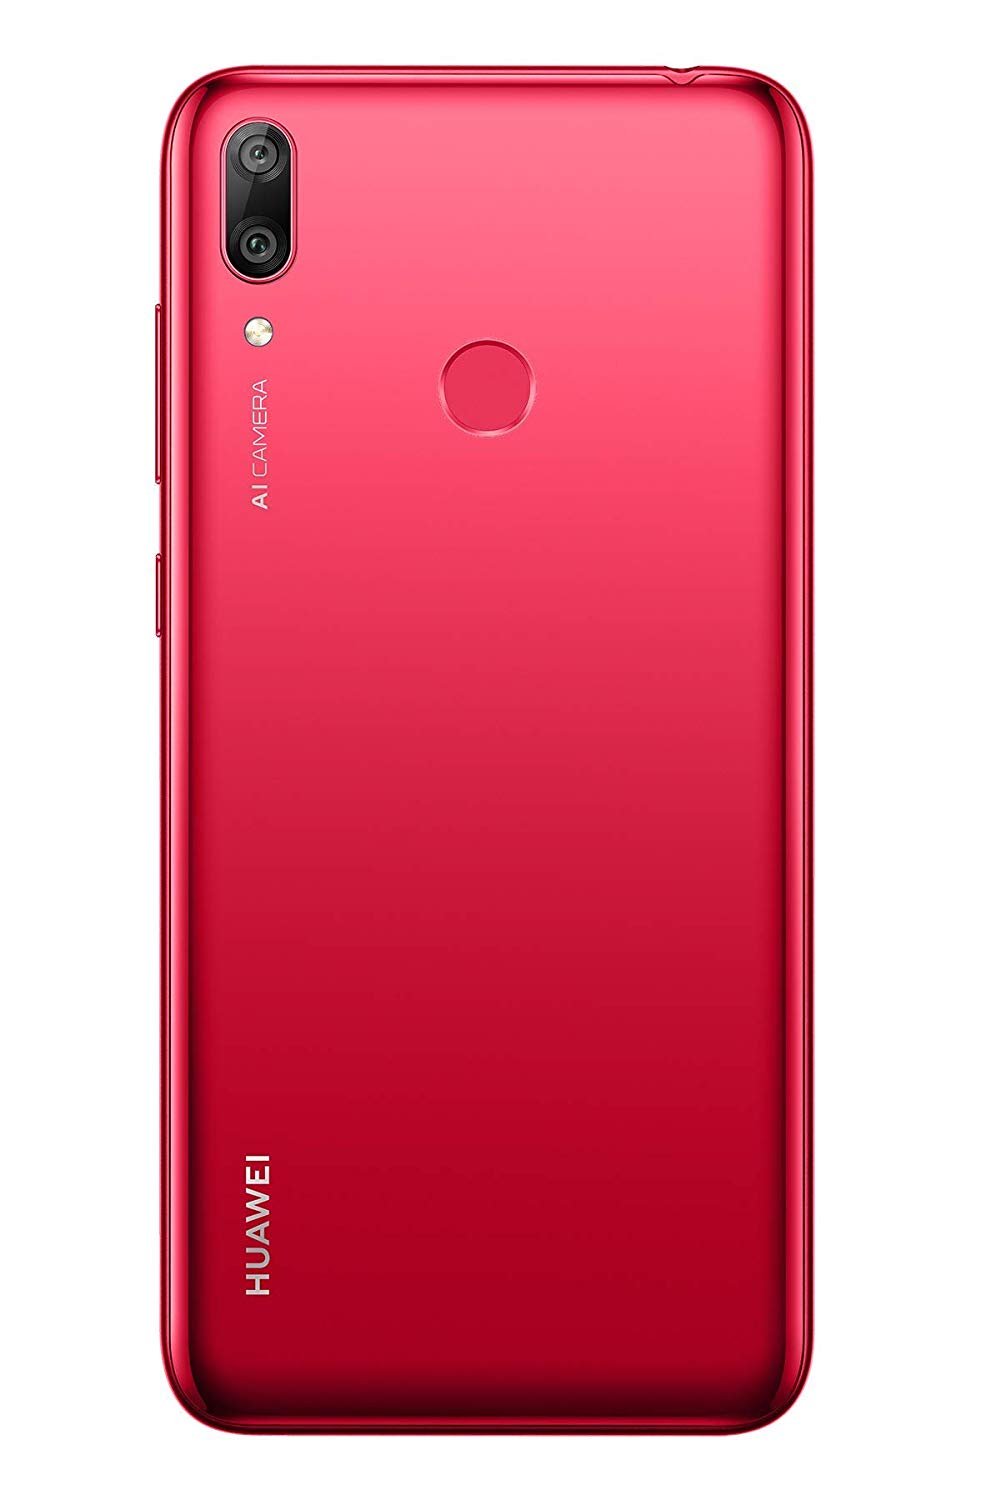 Huawei Y7 (2019) review